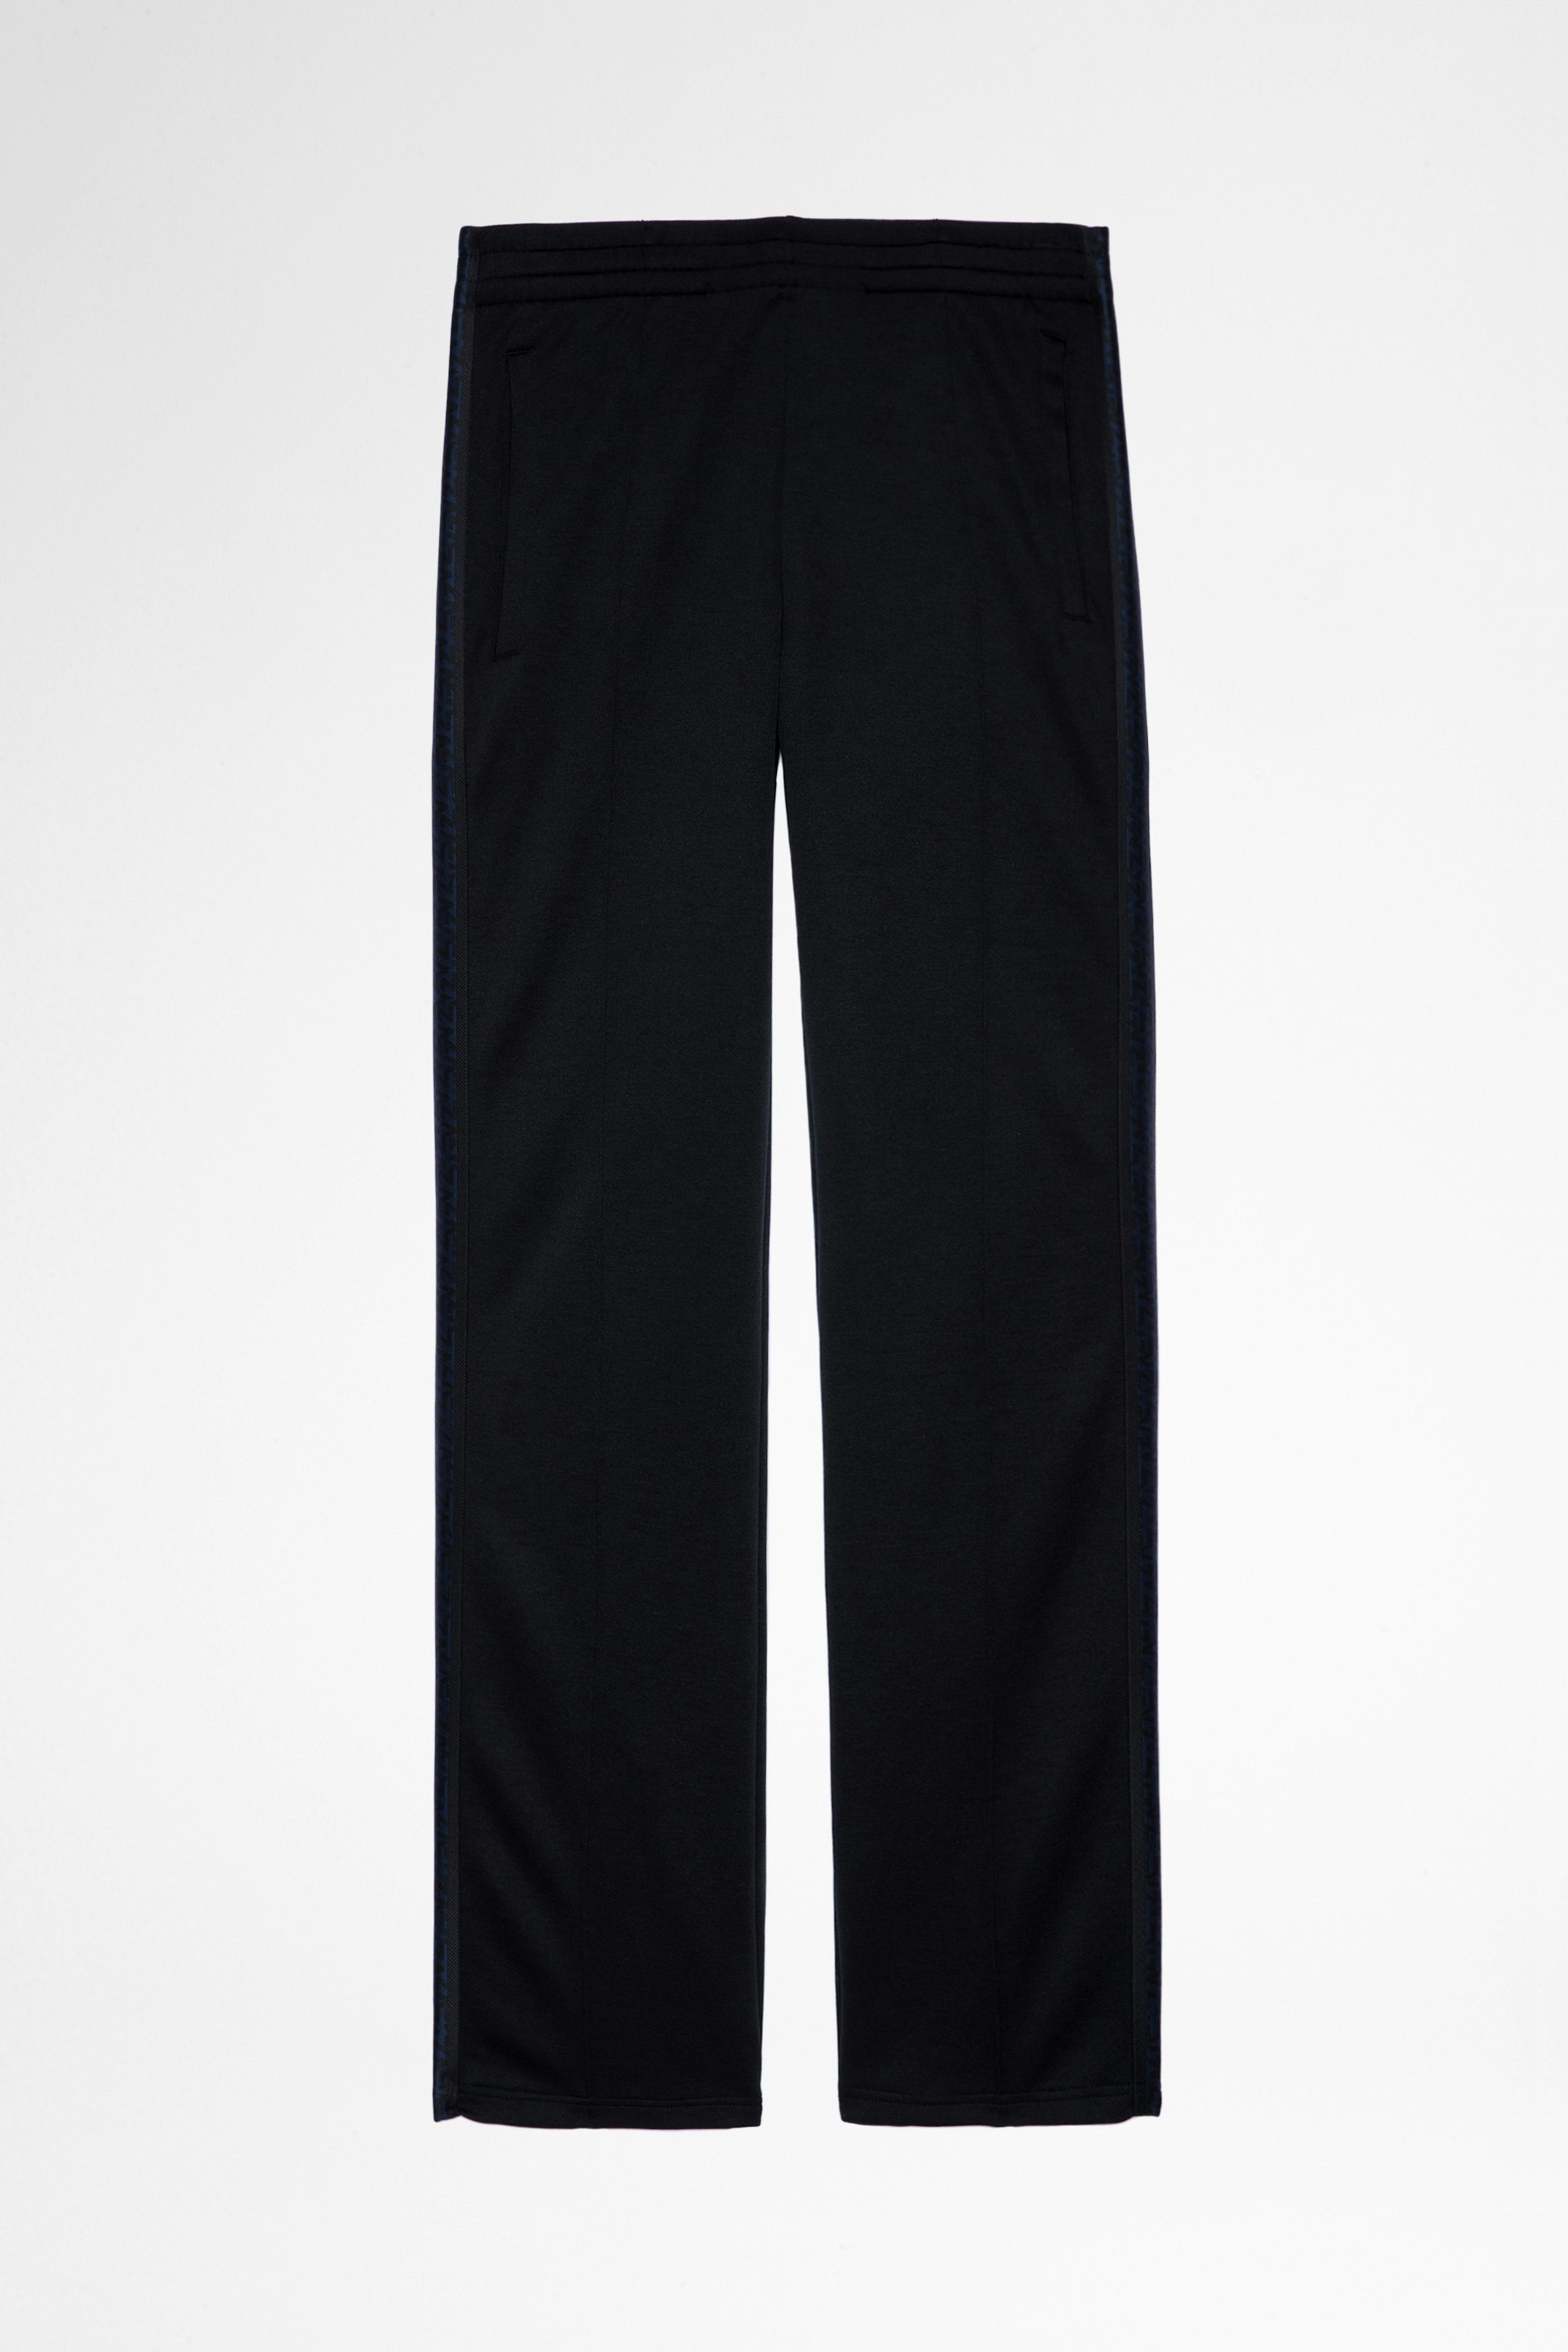 Chillyn Pants Men's black flared pants with side bands. Made with fibers from organic farming.